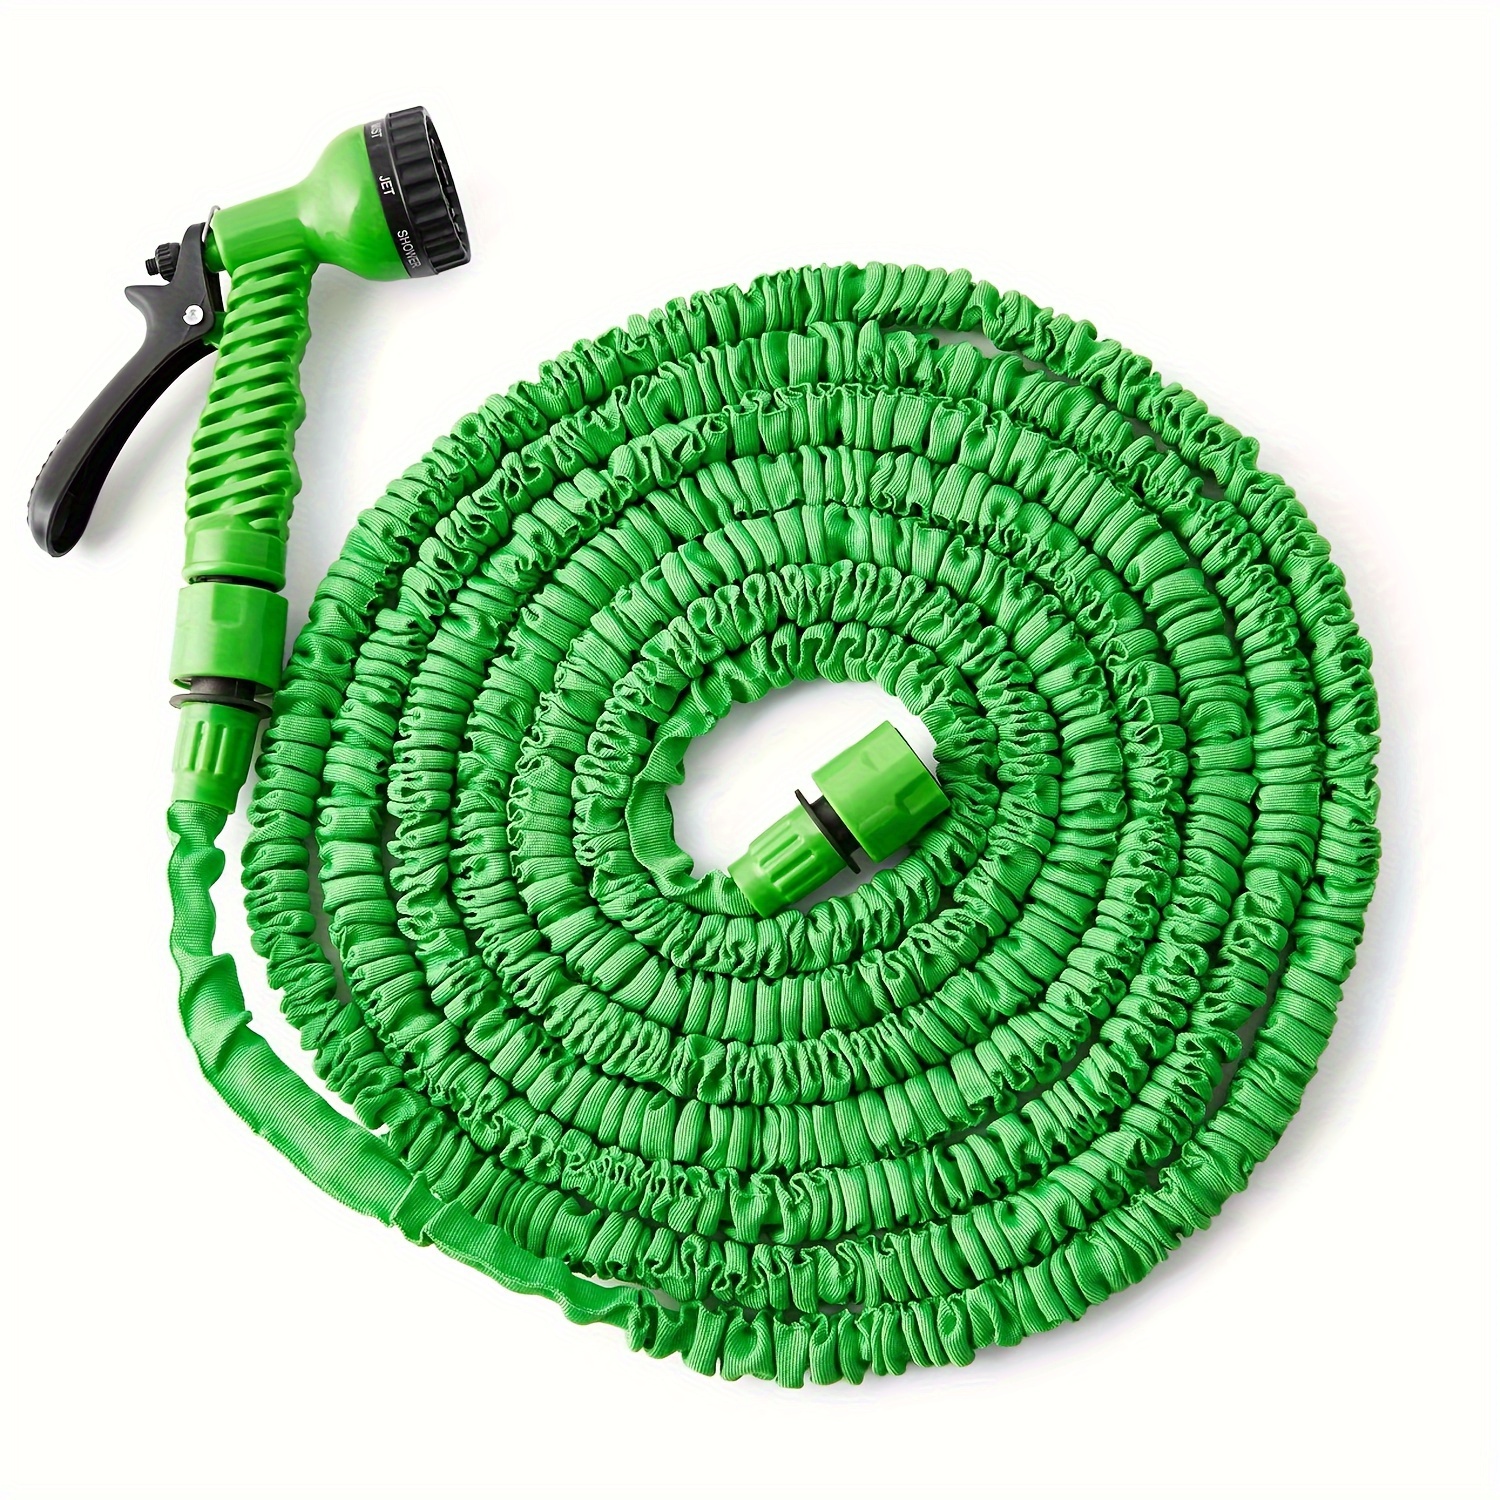 

Magic Garden Hose With Spray Gun - Expandable, High-pressure Car Wash & Watering Tool For Home Use, Fit